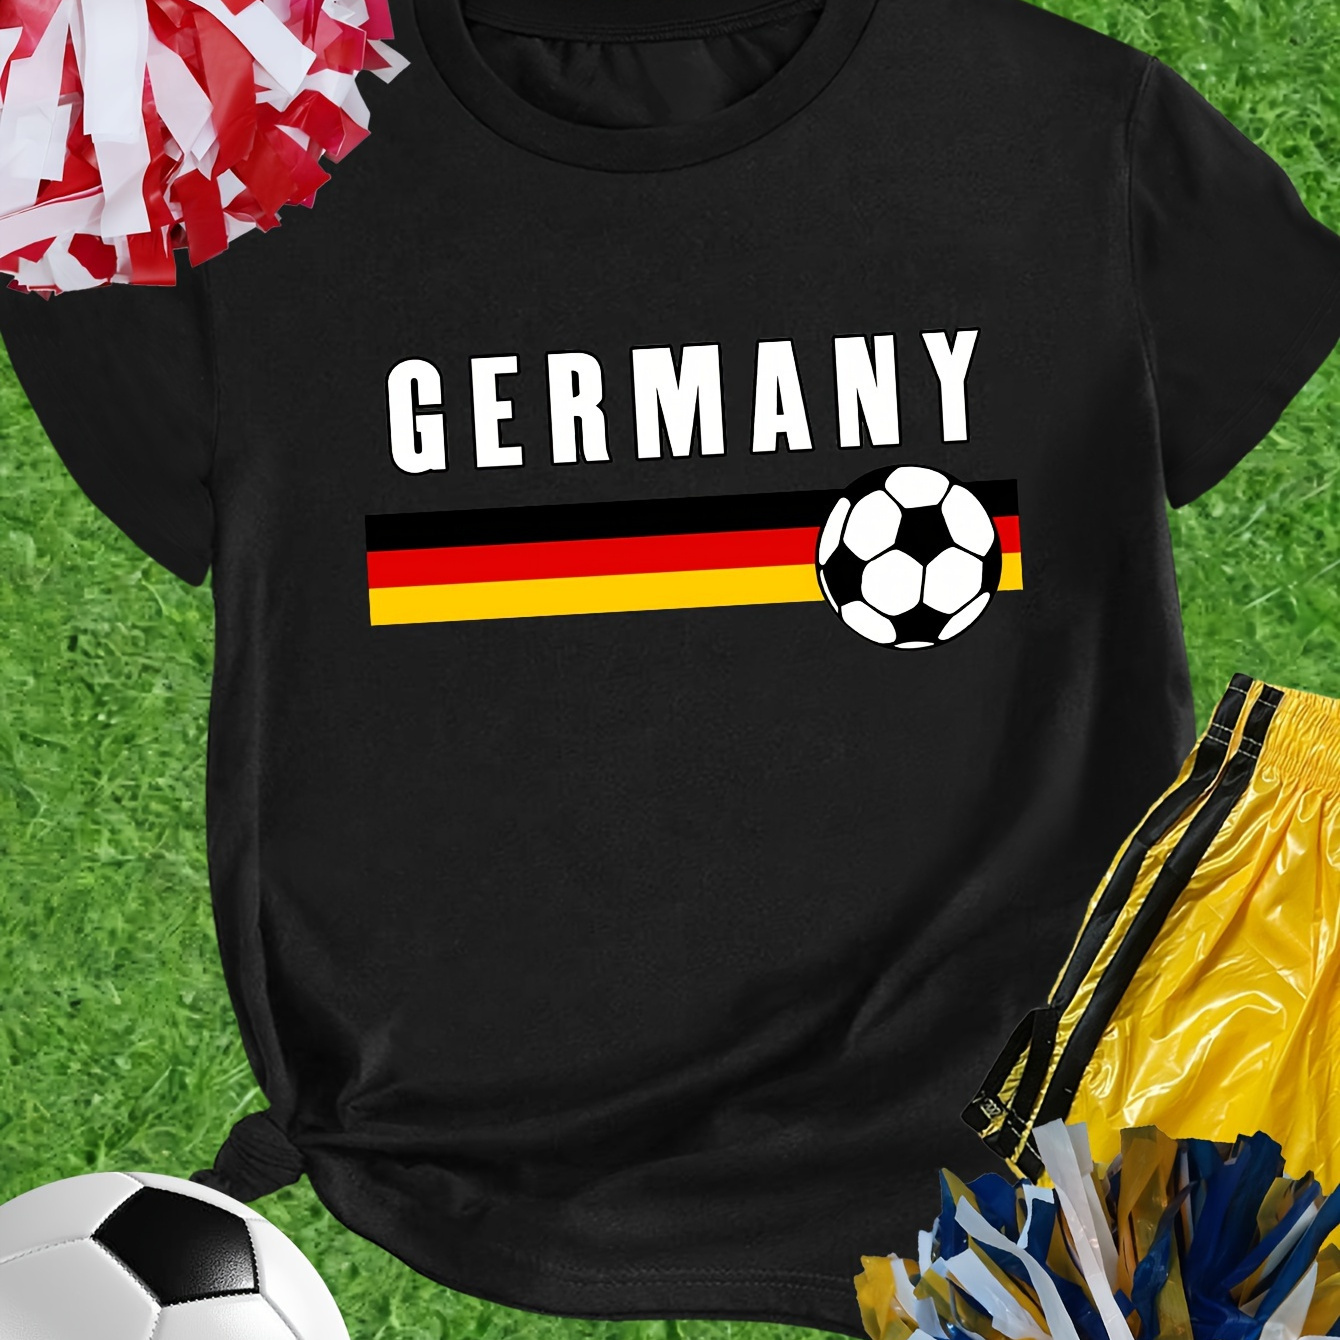 

Germany Soccer Team Shirt, Euro 2024 Soccer/football Event T-shirt With National Flag & Football Graphics, Sports Fan Apparel, Casual Wear